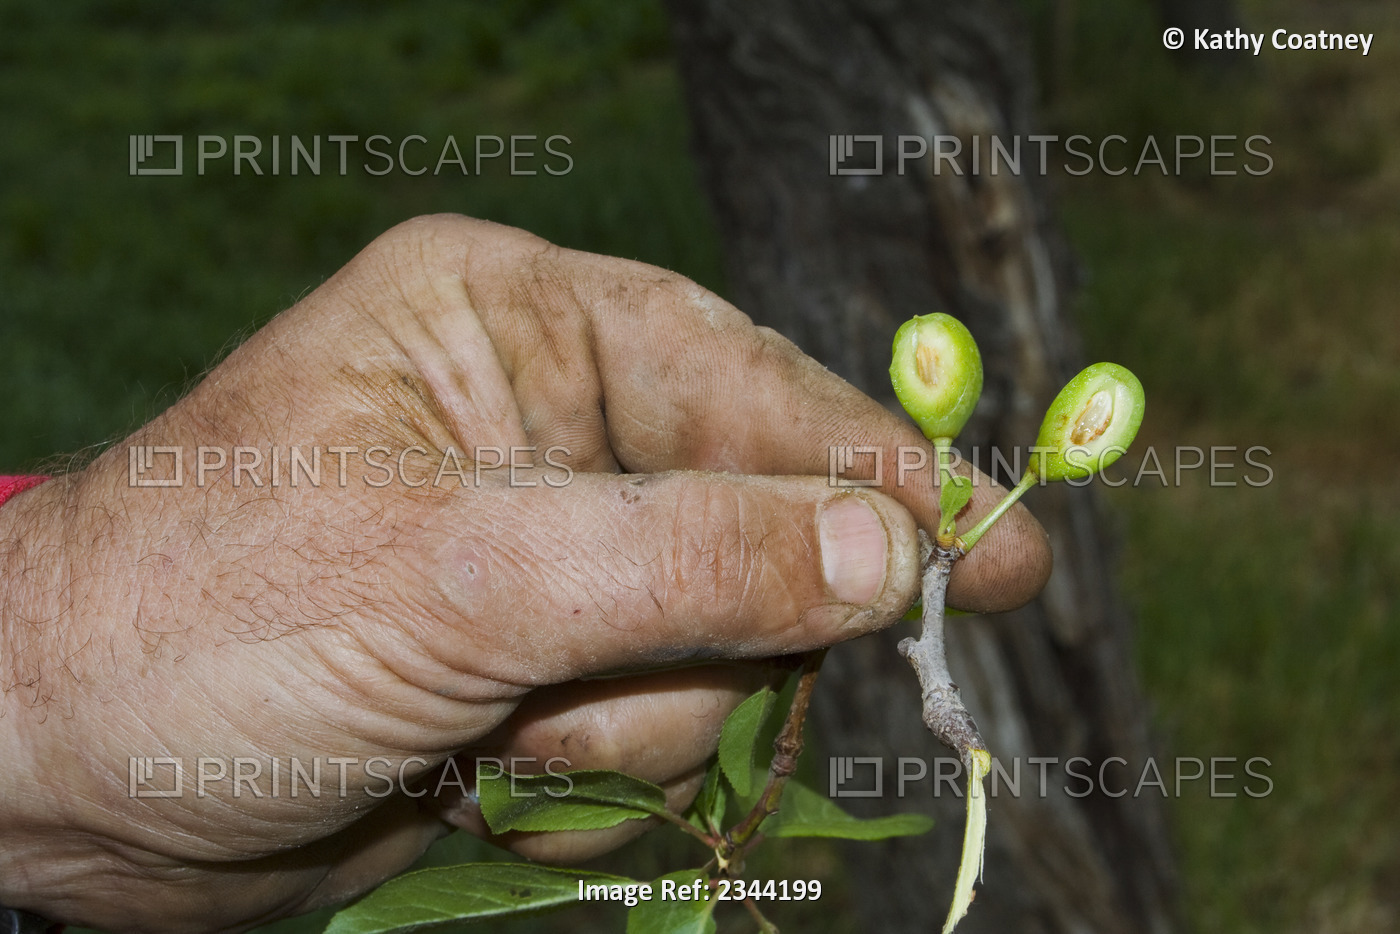 Agriculture - The hand of a prune grower holding damaged immature prunes caused ...